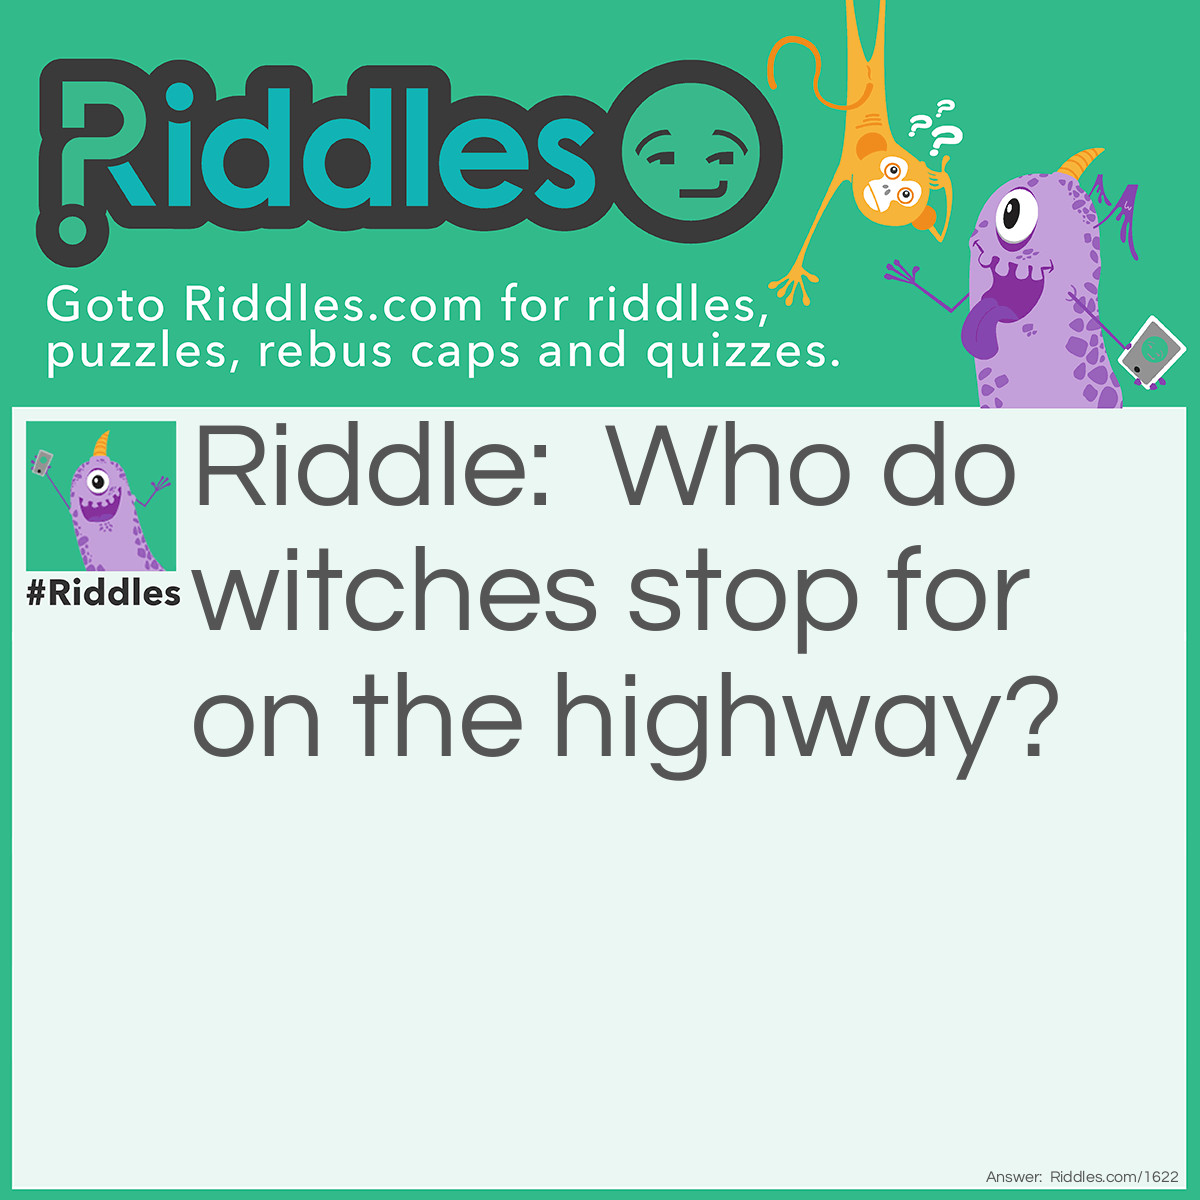 Riddle: Who do witches stop for on the highway? Answer: Witch-hikers.